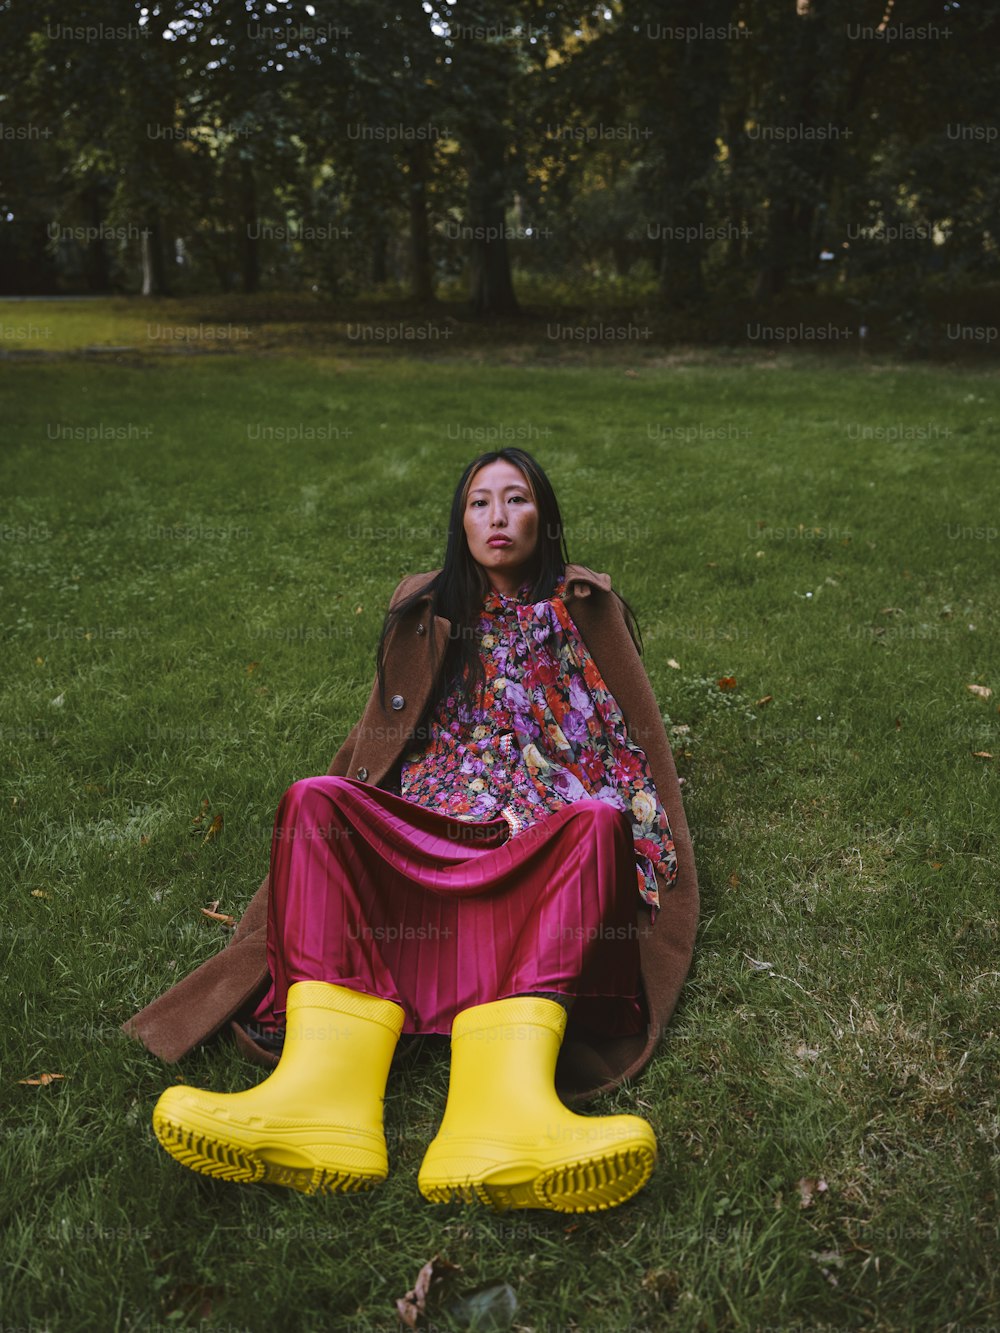 a woman sitting in the grass wearing yellow rain boots